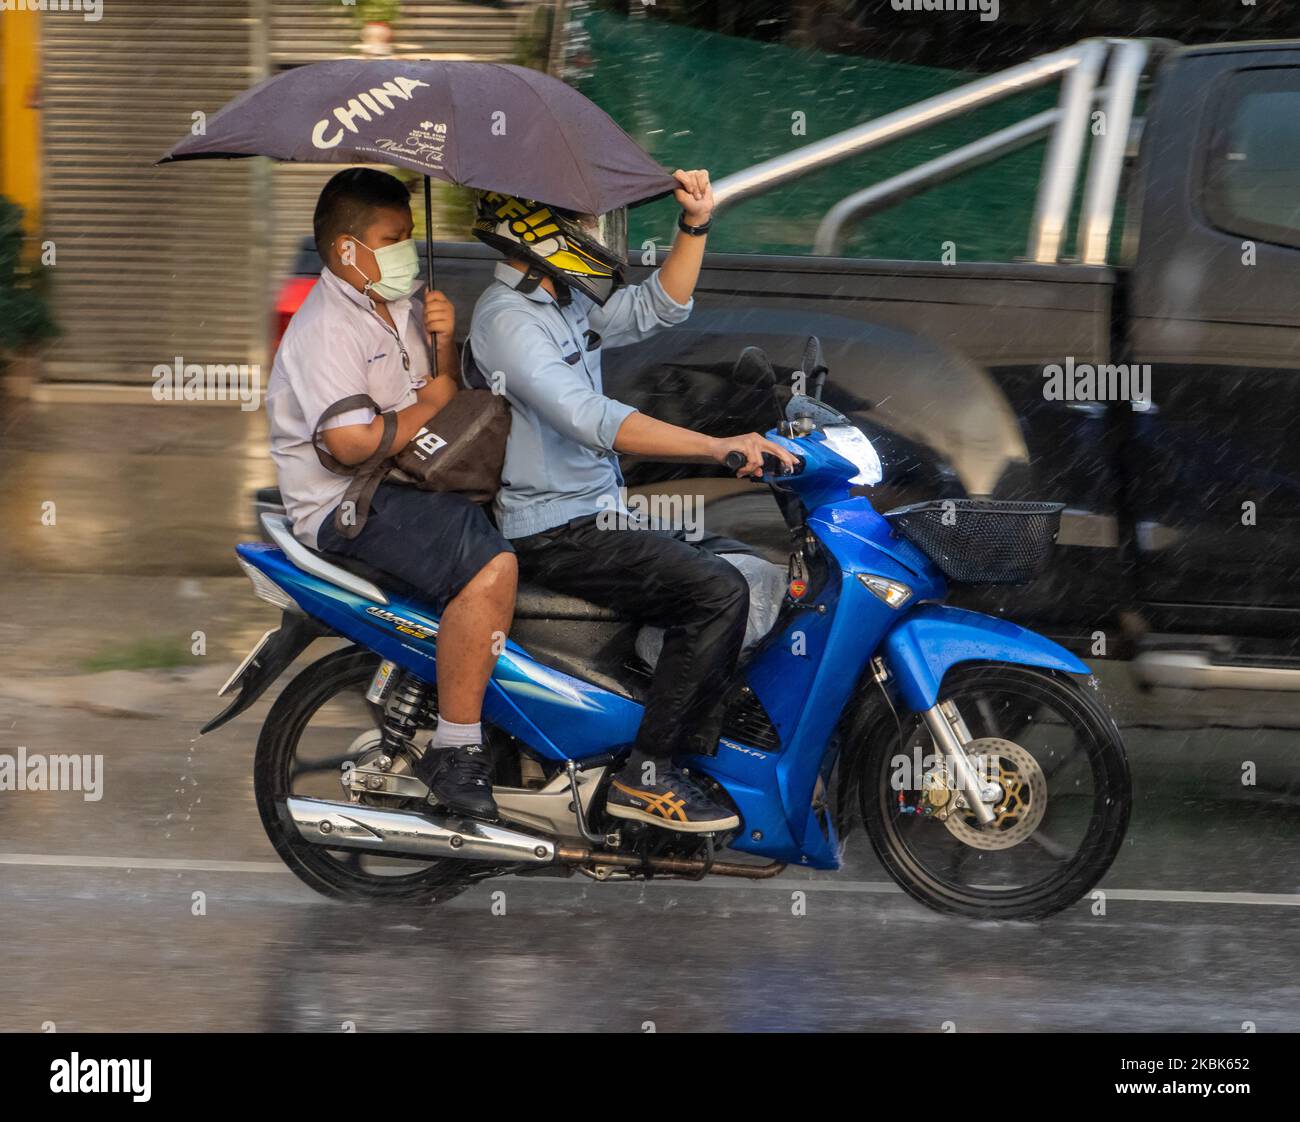 SAMUT PRAKAN, THAILAND, SEP 21 2022, A schoolboy rides a motorbike in the rain and holds an umbrella over himself and the driver Stock Photo